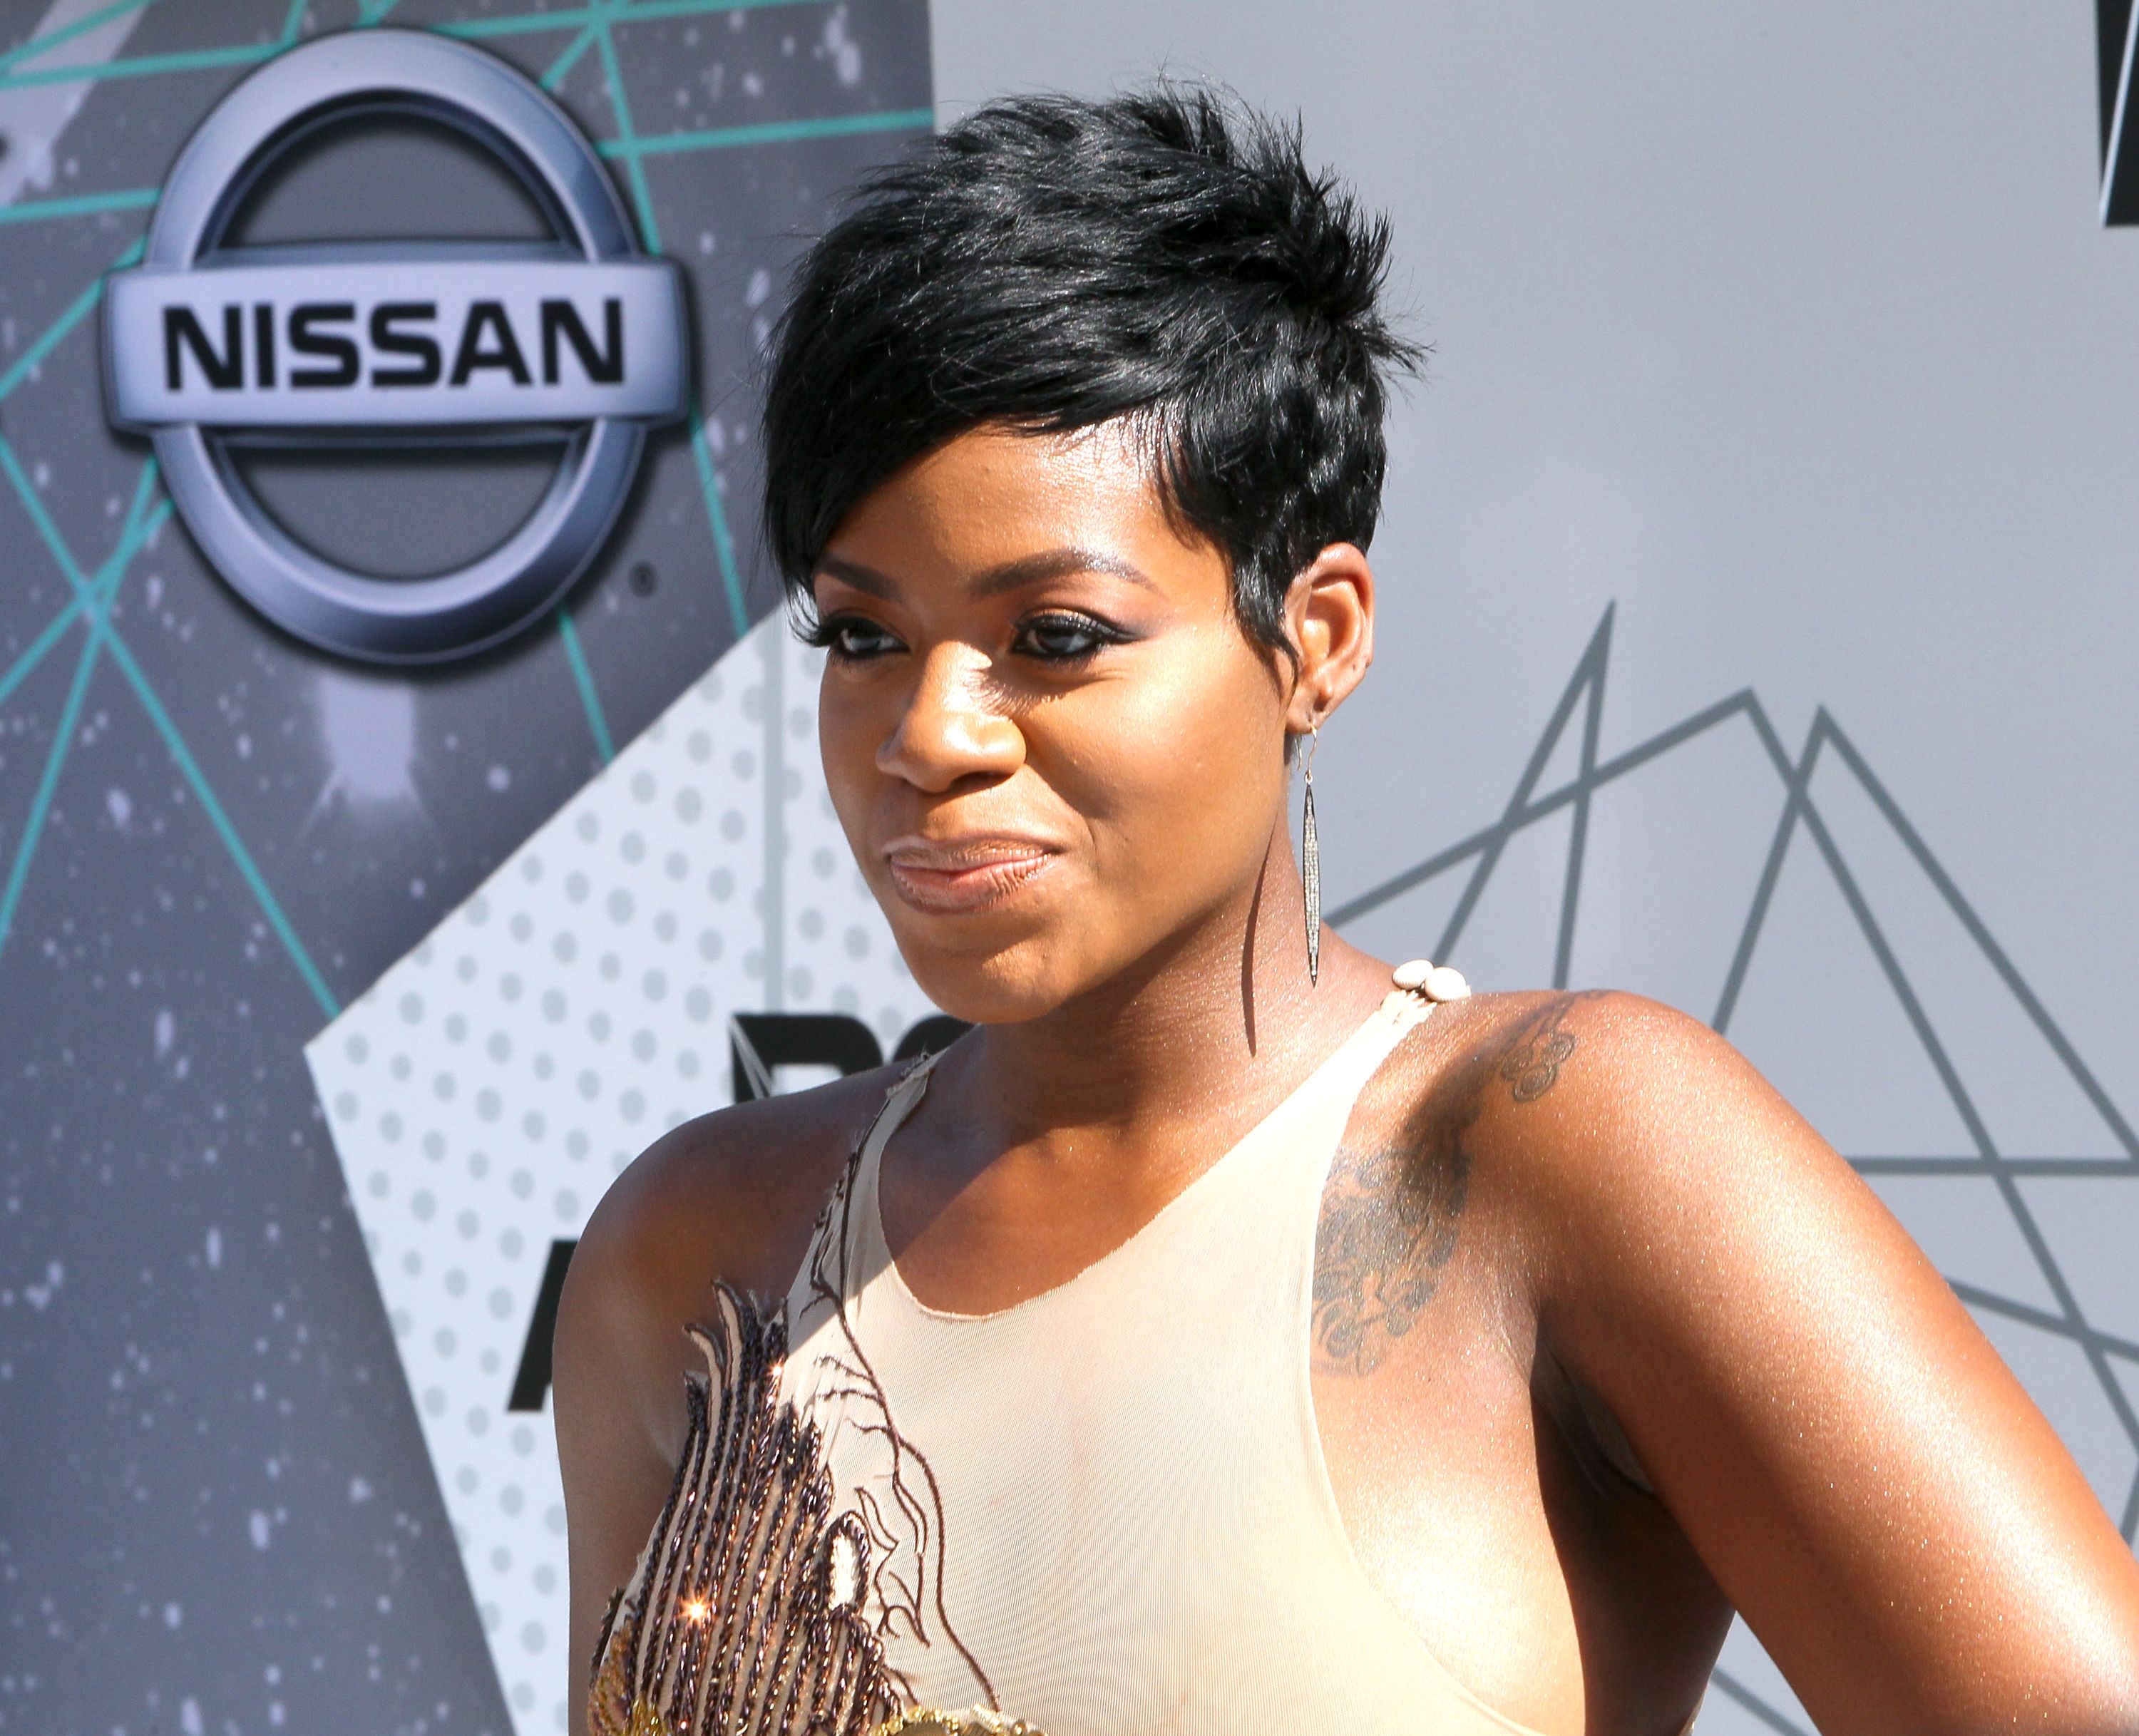 Singer Fantasia Barrino attends the 2016 BET Awards at Microsoft Theater on June 26, 2016 | Photo: Getty Images/GlobalImagesUkraine